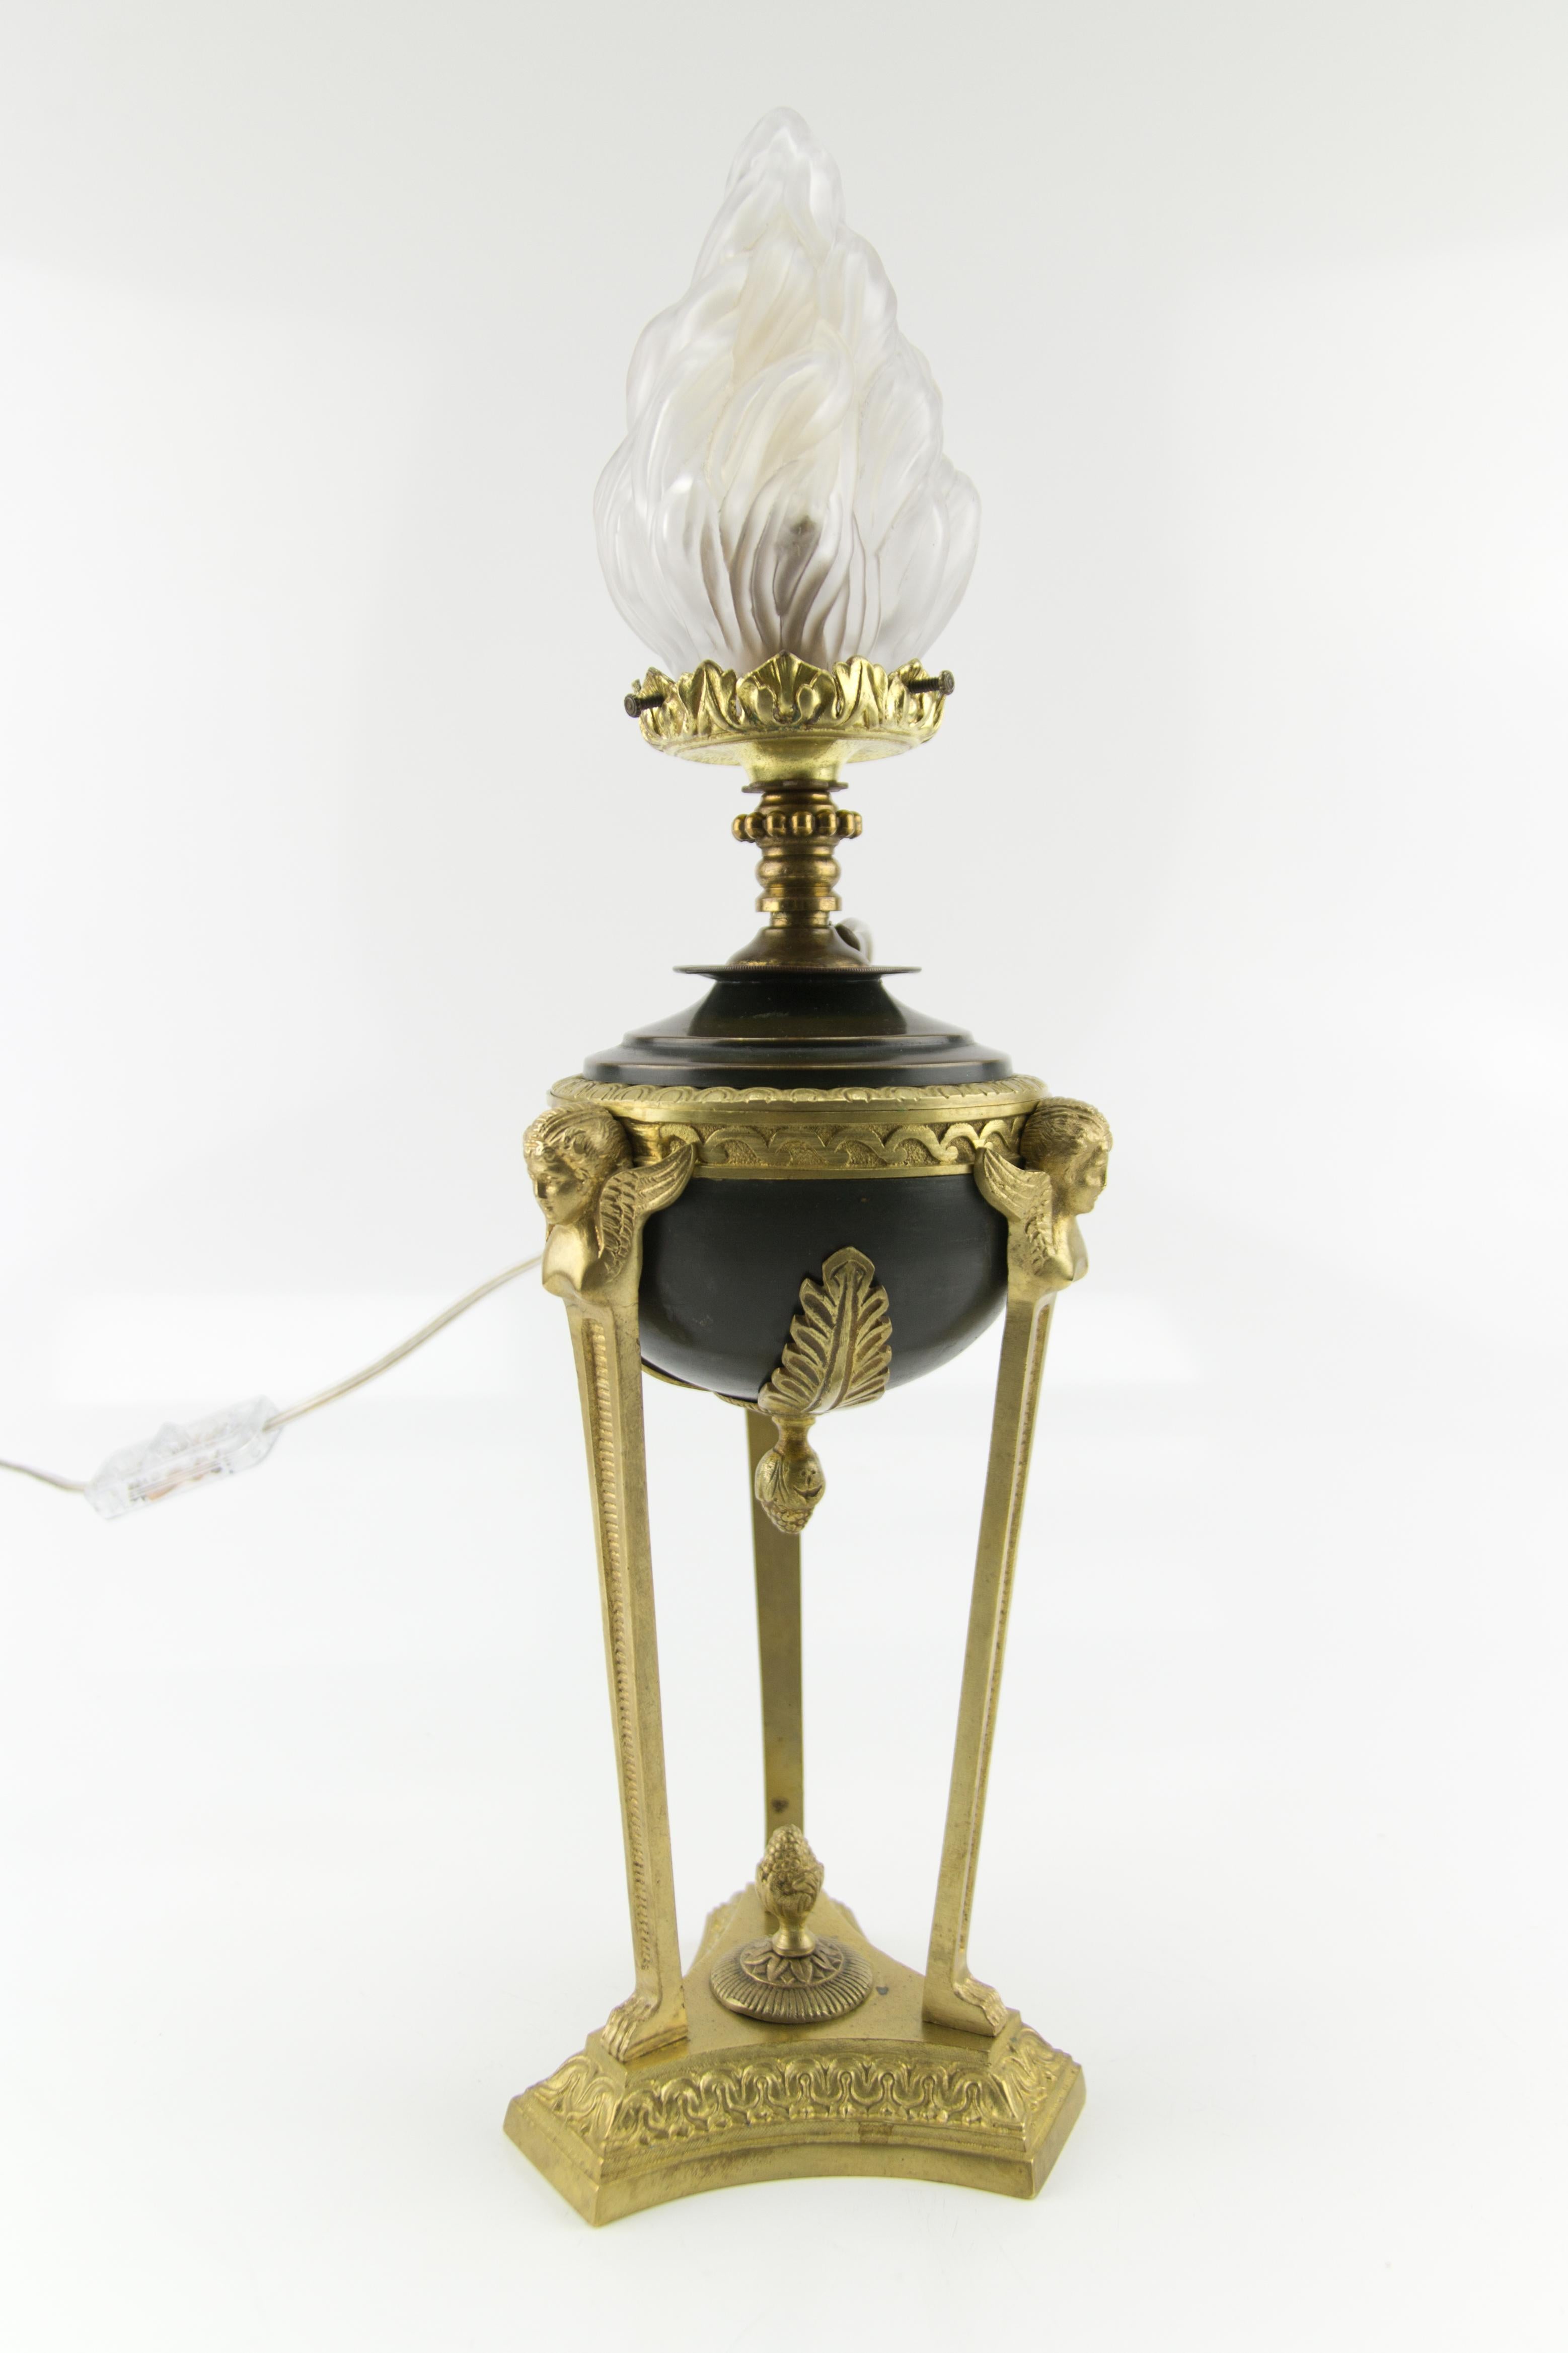 Early 20th French Empire style table lamp has a tri-form bronze plinth with a central pine cone, with three legs with paw feet topped by three bronze sphinx supports, holding the dark green tôle oil reservoir, decorated on all three sides by bronze